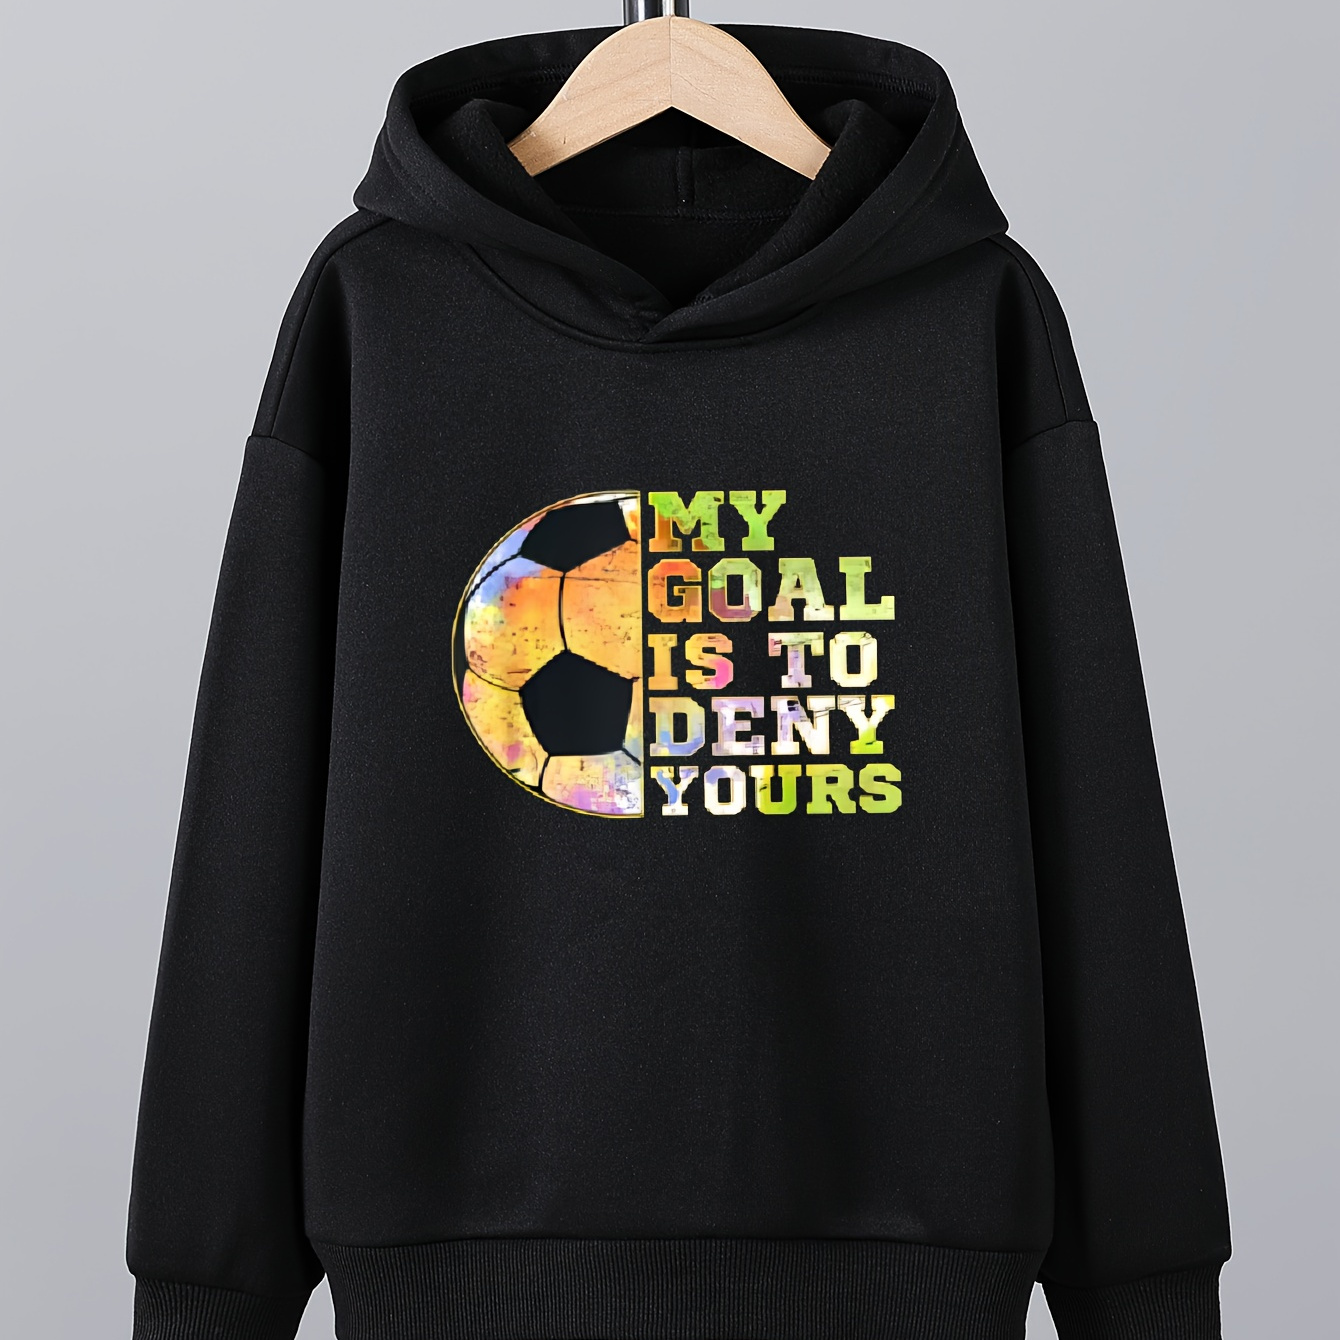 

Colorful Football And My Goal Is To Deny Letter Print Sweatshirt For Boys - Cool, Lightweight And Comfy Spring Fall Winter Clothes!